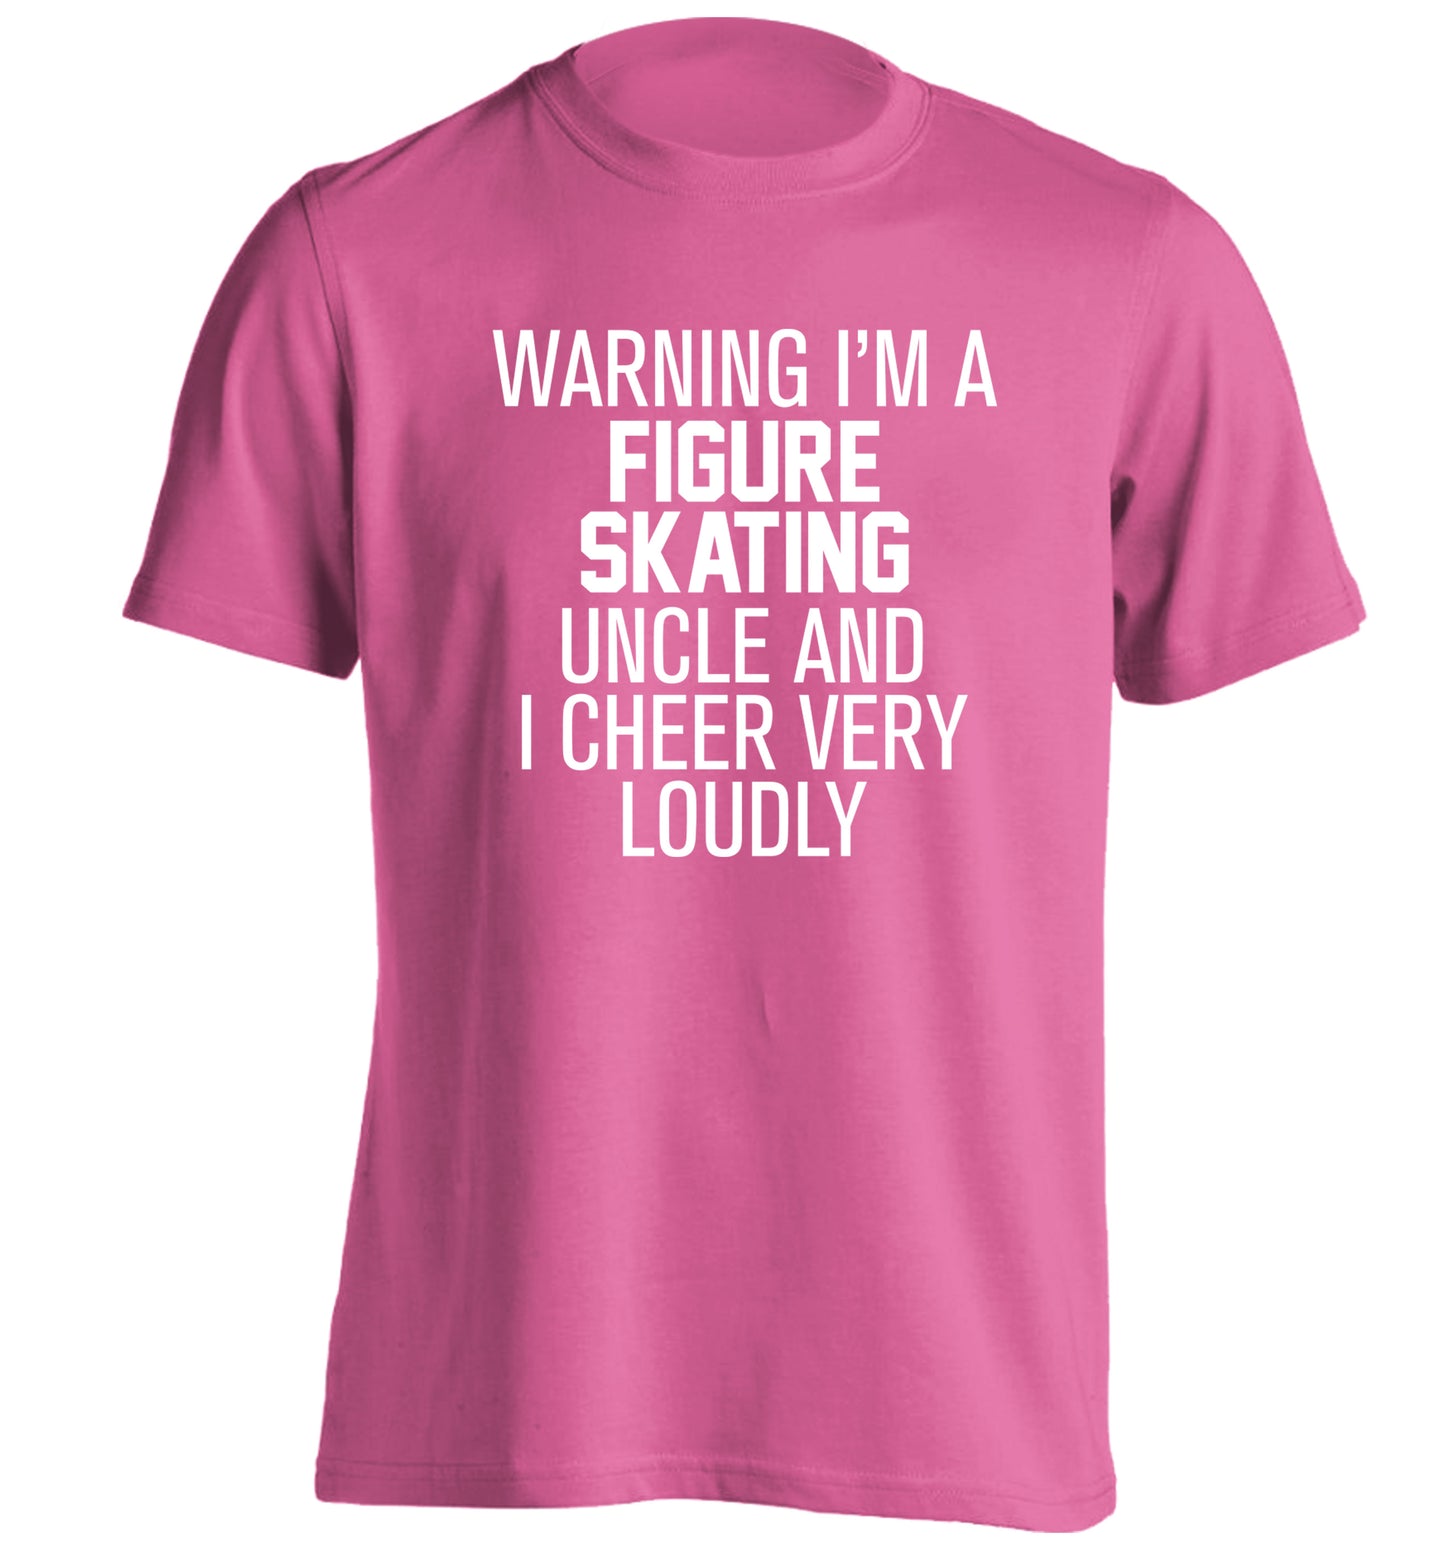 Warning I'm a figure skating uncle and I cheer very loudly adults unisexpink Tshirt 2XL